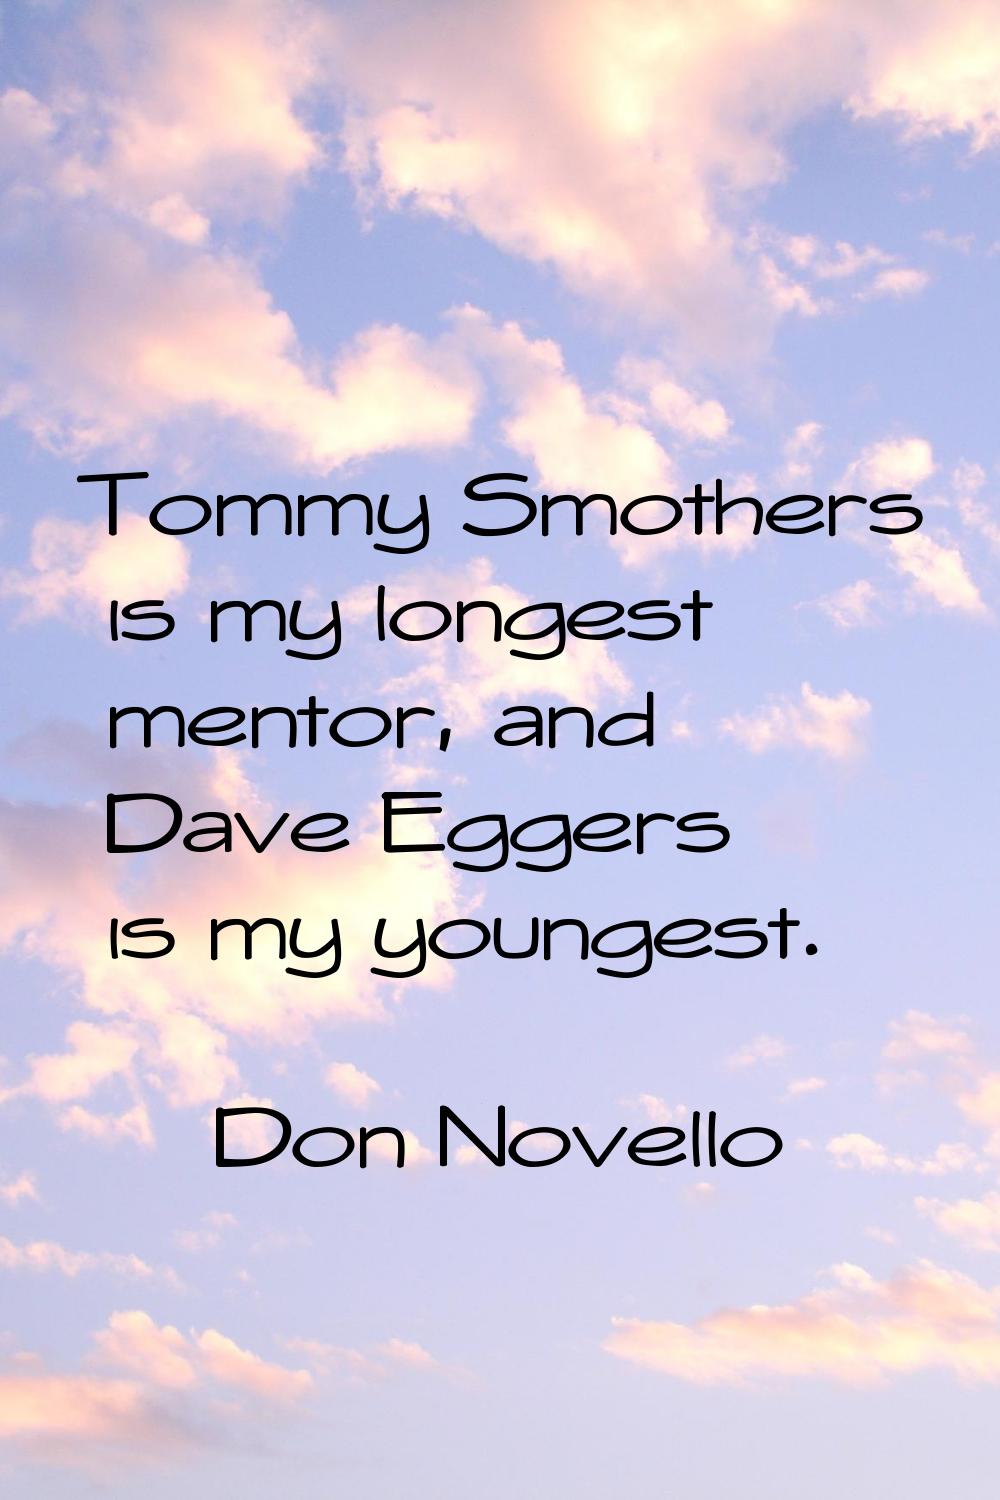 Tommy Smothers is my longest mentor, and Dave Eggers is my youngest.